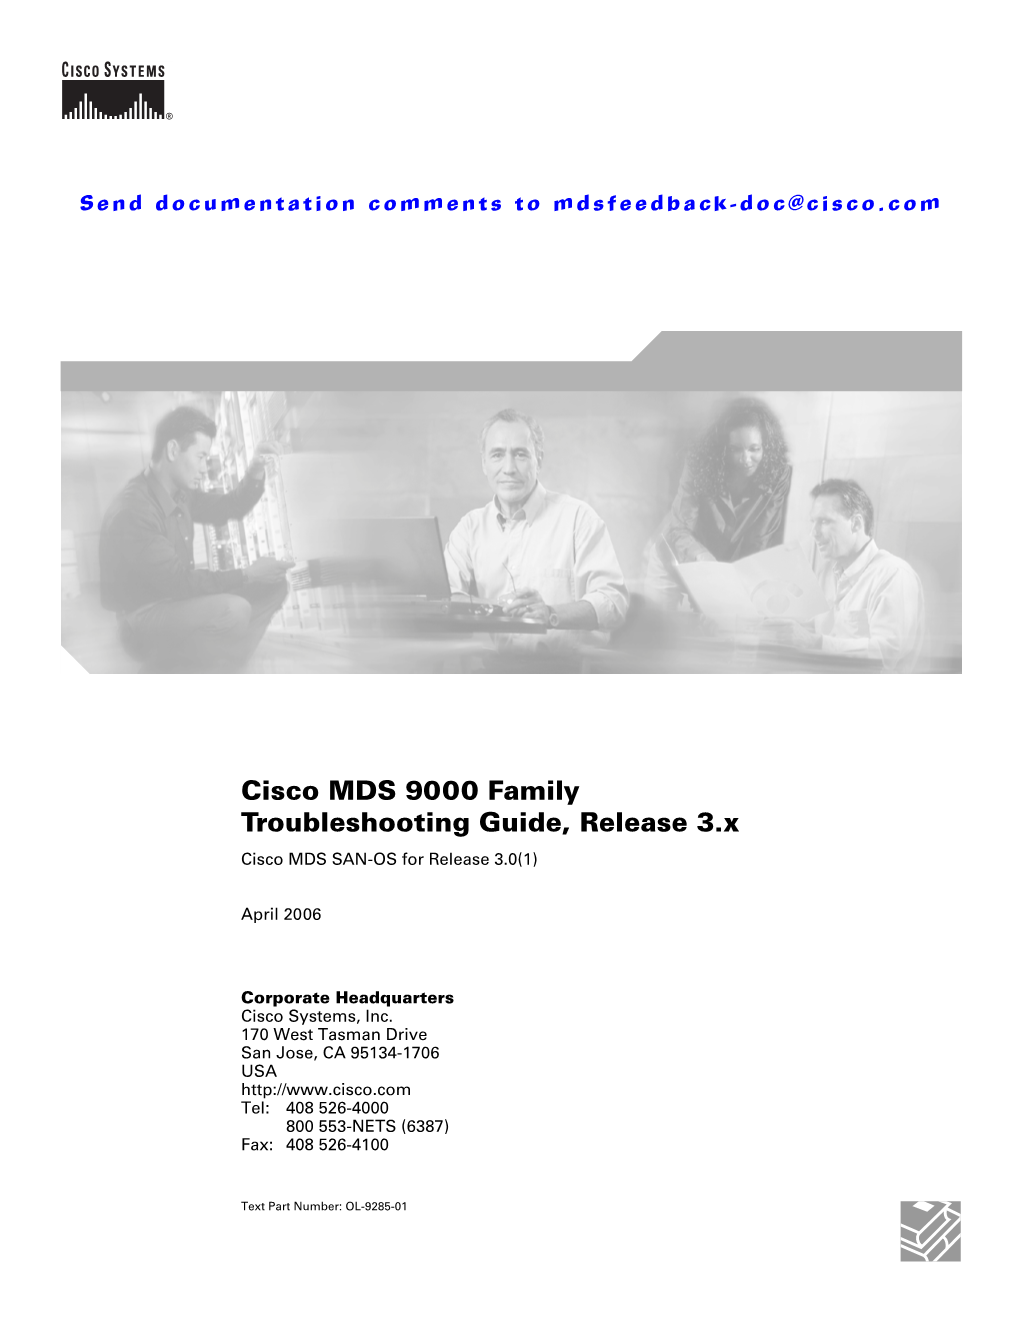 Cisco MDS 9000 Family Troubleshooting Guide, Release 3.X Cisco MDS SAN-OS for Release 3.0(1)